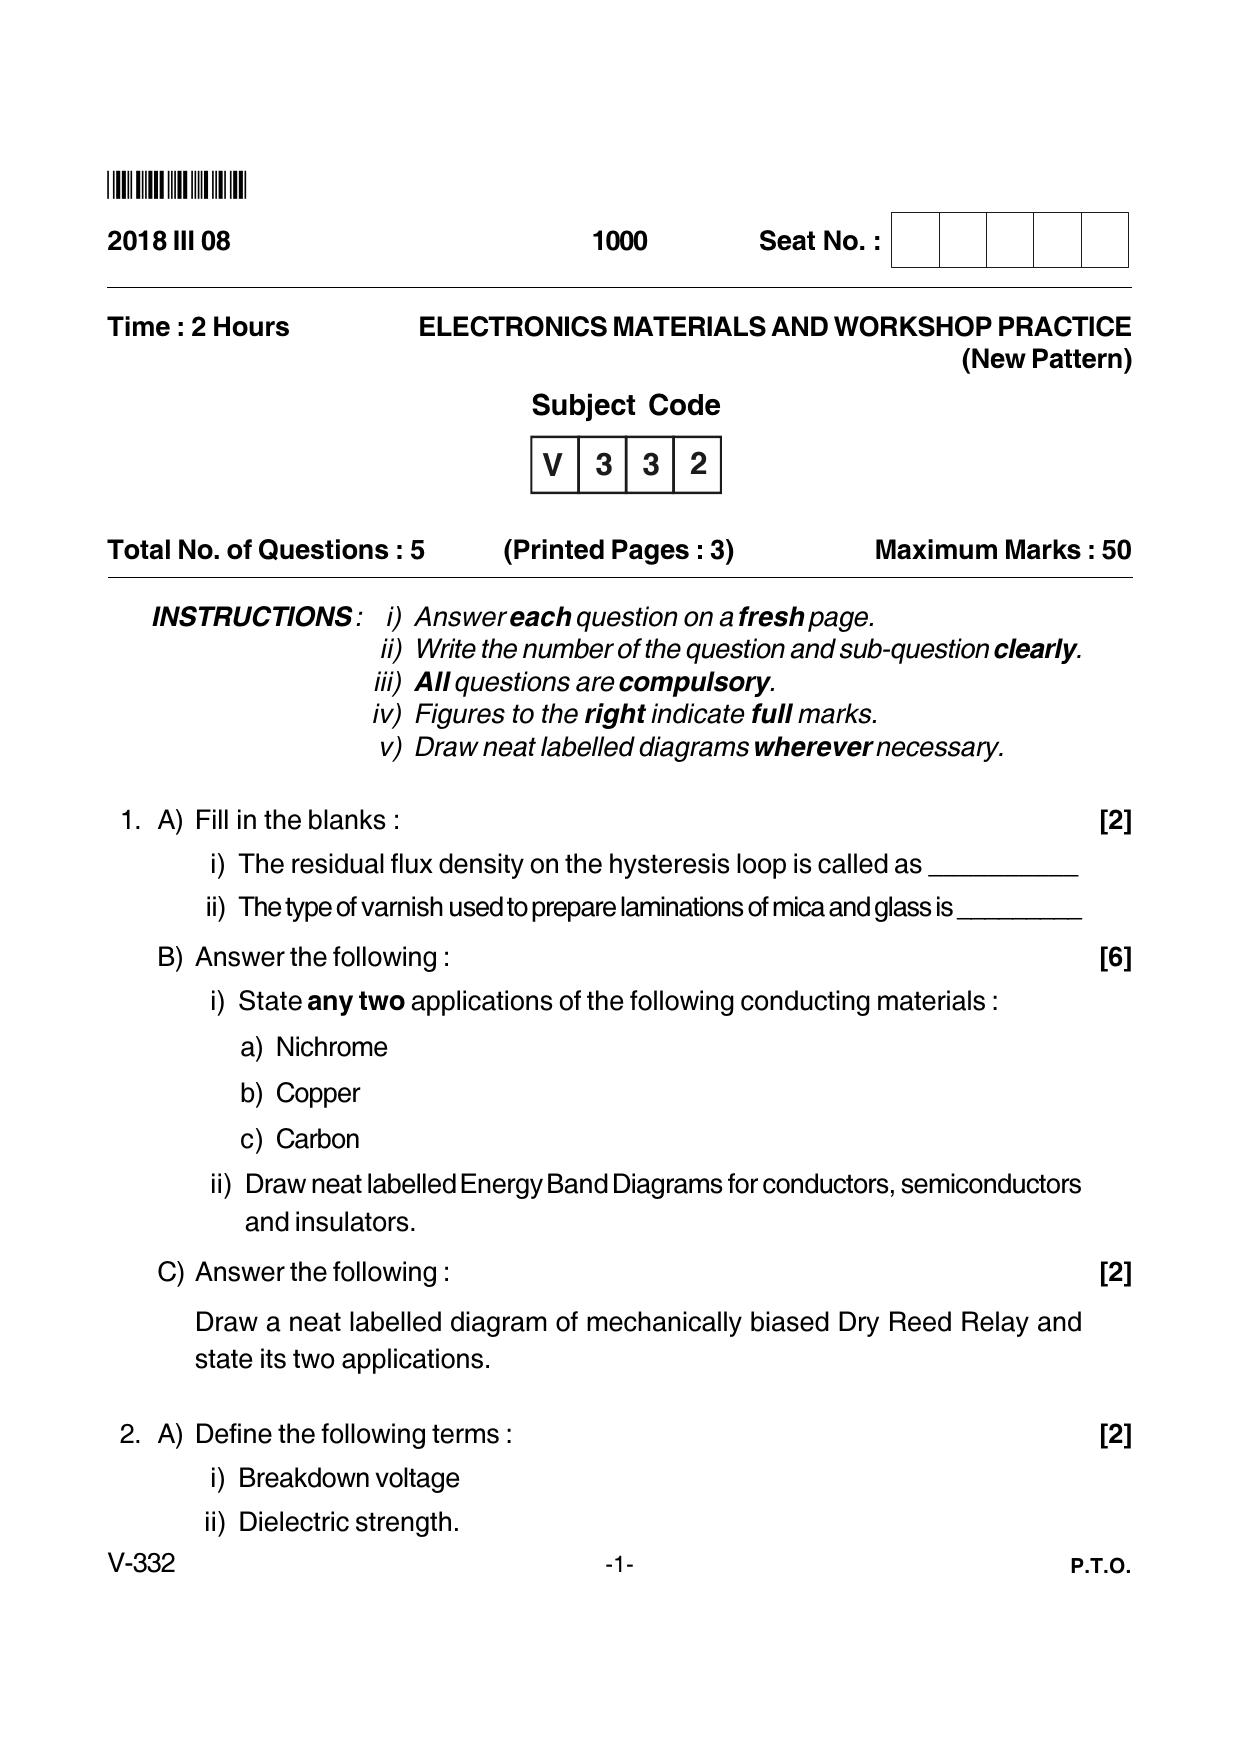 Goa Board Class 12 Electronic Material & Workshop Practice  Voc 332 New Pattern (March 2018) Question Paper - Page 1